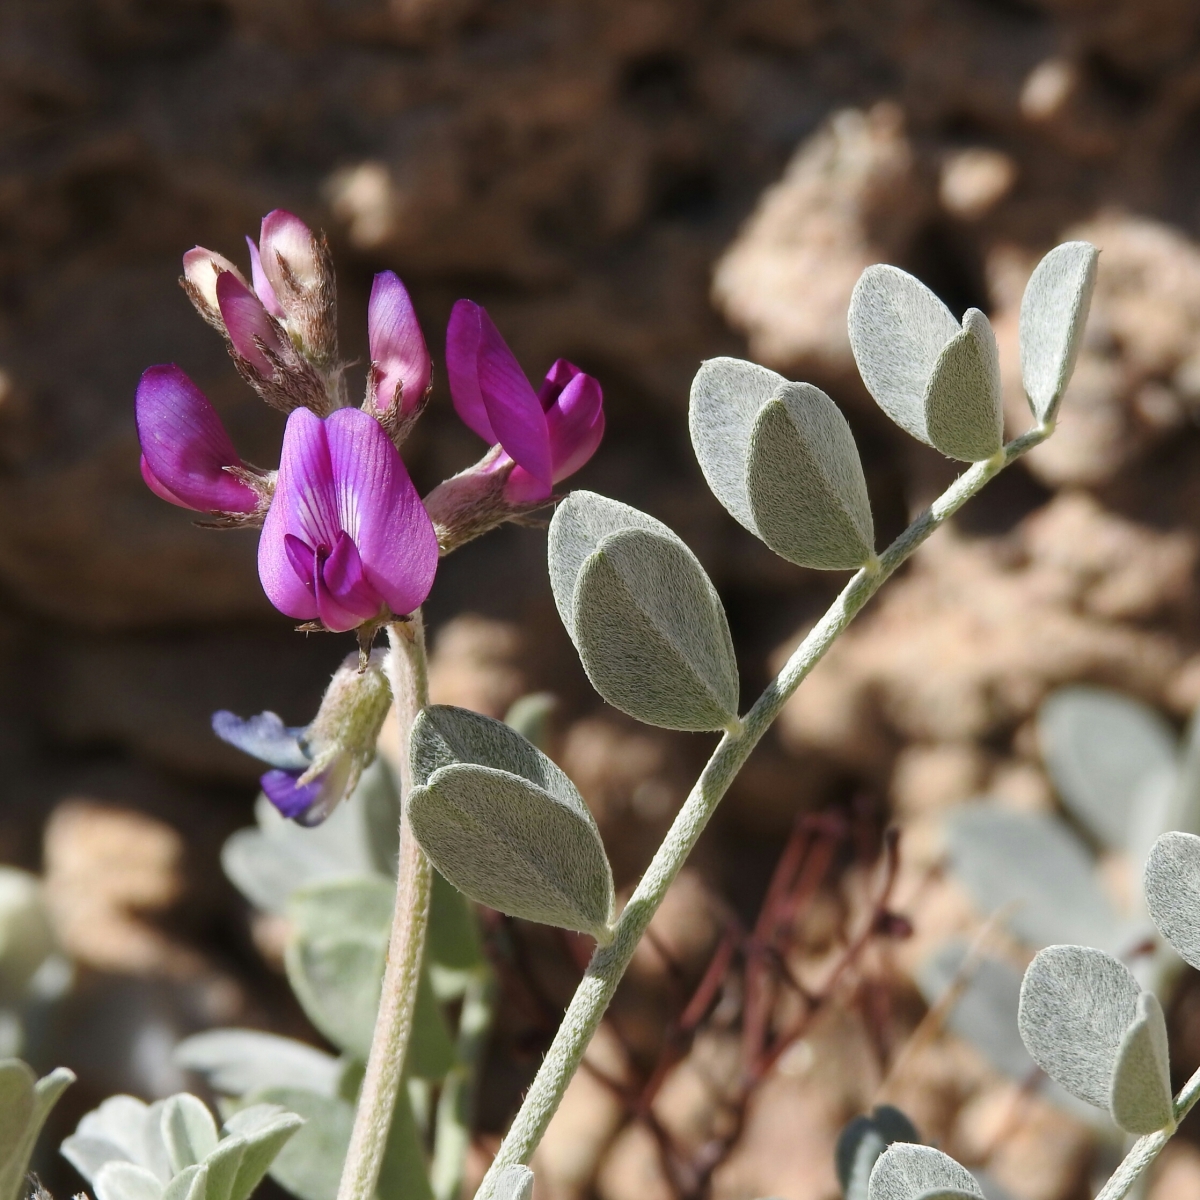 Astragalus mohavensis